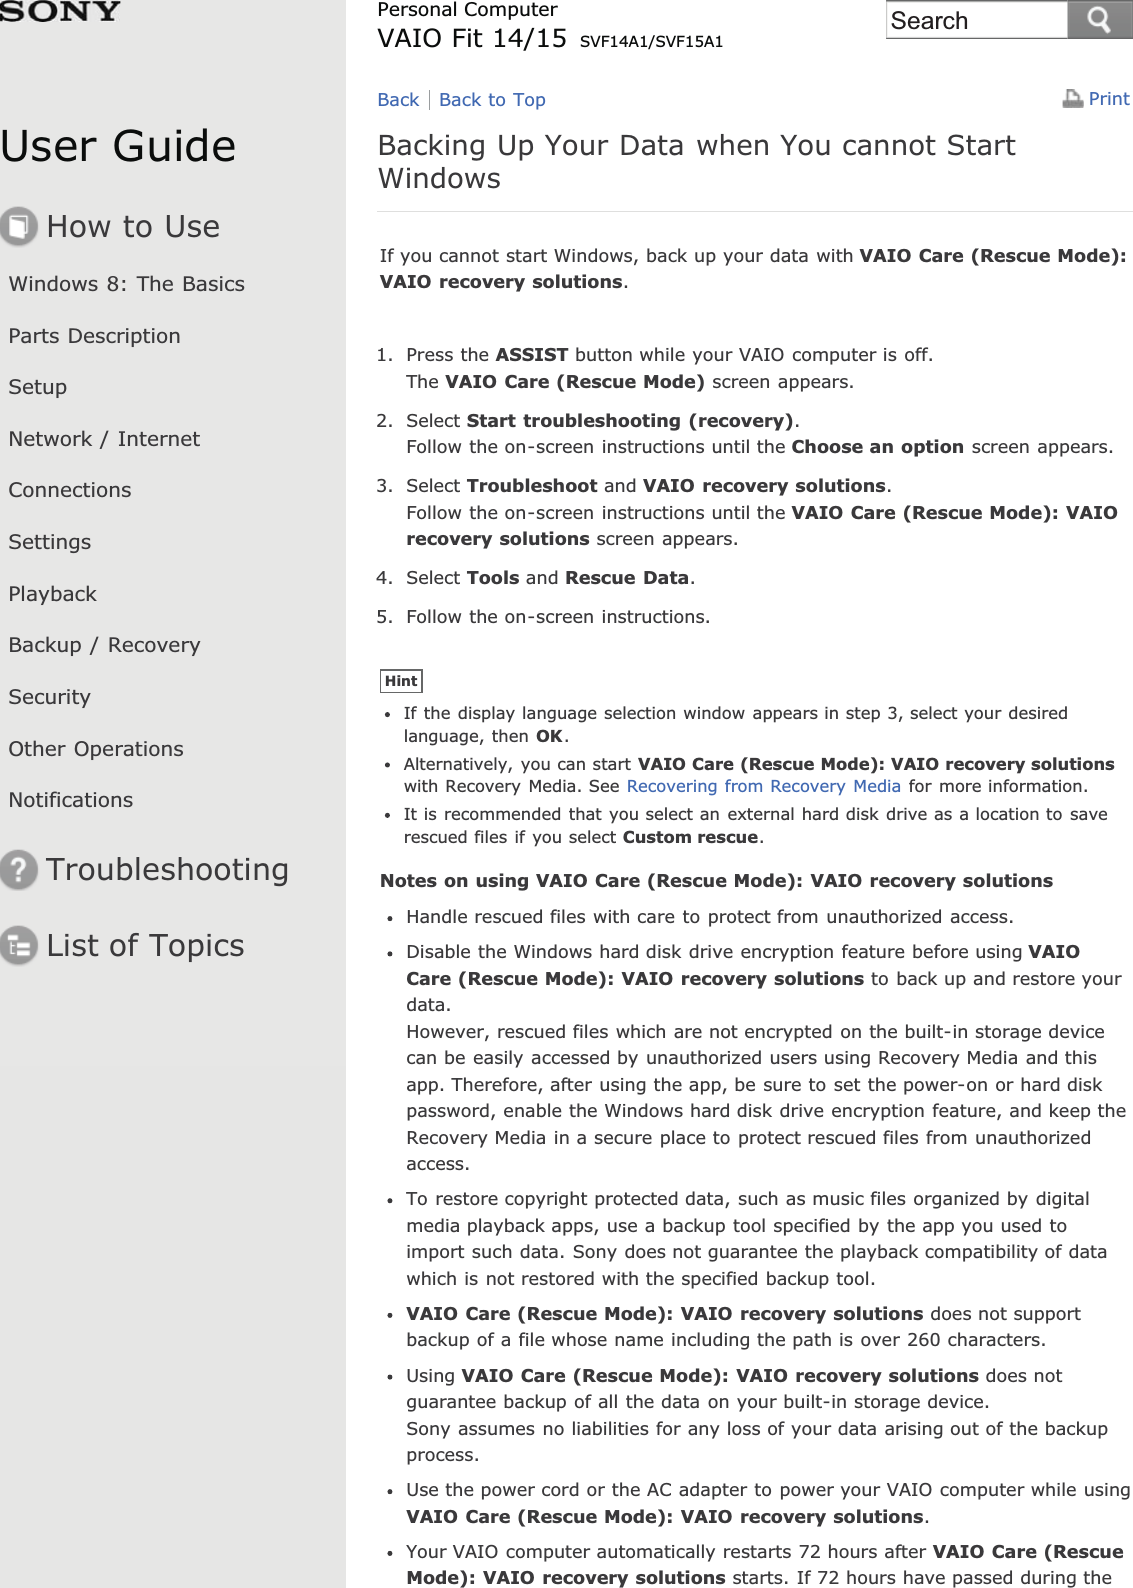 User GuideHow to UseWindows 8: The BasicsParts DescriptionSetupNetwork / InternetConnectionsSettingsPlaybackBackup / RecoverySecurityOther OperationsNotificationsTroubleshootingList of TopicsPrintPersonal ComputerVAIO Fit 14/15 SVF14A1/SVF15A1Backing Up Your Data when You cannot StartWindowsIf you cannot start Windows, back up your data with VAIO Care (Rescue Mode):VAIO recovery solutions.1. Press the ASSIST button while your VAIO computer is off.The VAIO Care (Rescue Mode) screen appears.2. Select Start troubleshooting (recovery).Follow the on-screen instructions until the Choose an option screen appears.3. Select Troubleshoot and VAIO recovery solutions.Follow the on-screen instructions until the VAIO Care (Rescue Mode): VAIOrecovery solutions screen appears.4. Select Tools and Rescue Data.5. Follow the on-screen instructions.HintIf the display language selection window appears in step 3, select your desiredlanguage, then OK.Alternatively, you can start VAIO Care (Rescue Mode): VAIO recovery solutionswith Recovery Media. See Recovering from Recovery Media for more information.It is recommended that you select an external hard disk drive as a location to saverescued files if you select Custom rescue.Notes on using VAIO Care (Rescue Mode): VAIO recovery solutionsHandle rescued files with care to protect from unauthorized access.Disable the Windows hard disk drive encryption feature before using VAIOCare (Rescue Mode): VAIO recovery solutions to back up and restore yourdata.However, rescued files which are not encrypted on the built-in storage devicecan be easily accessed by unauthorized users using Recovery Media and thisapp. Therefore, after using the app, be sure to set the power-on or hard diskpassword, enable the Windows hard disk drive encryption feature, and keep theRecovery Media in a secure place to protect rescued files from unauthorizedaccess.To restore copyright protected data, such as music files organized by digitalmedia playback apps, use a backup tool specified by the app you used toimport such data. Sony does not guarantee the playback compatibility of datawhich is not restored with the specified backup tool.VAIO Care (Rescue Mode): VAIO recovery solutions does not supportbackup of a file whose name including the path is over 260 characters.Using VAIO Care (Rescue Mode): VAIO recovery solutions does notguarantee backup of all the data on your built-in storage device.Sony assumes no liabilities for any loss of your data arising out of the backupprocess.Use the power cord or the AC adapter to power your VAIO computer while usingVAIO Care (Rescue Mode): VAIO recovery solutions.Your VAIO computer automatically restarts 72 hours after VAIO Care (RescueMode): VAIO recovery solutions starts. If 72 hours have passed during theBack Back to TopSearch